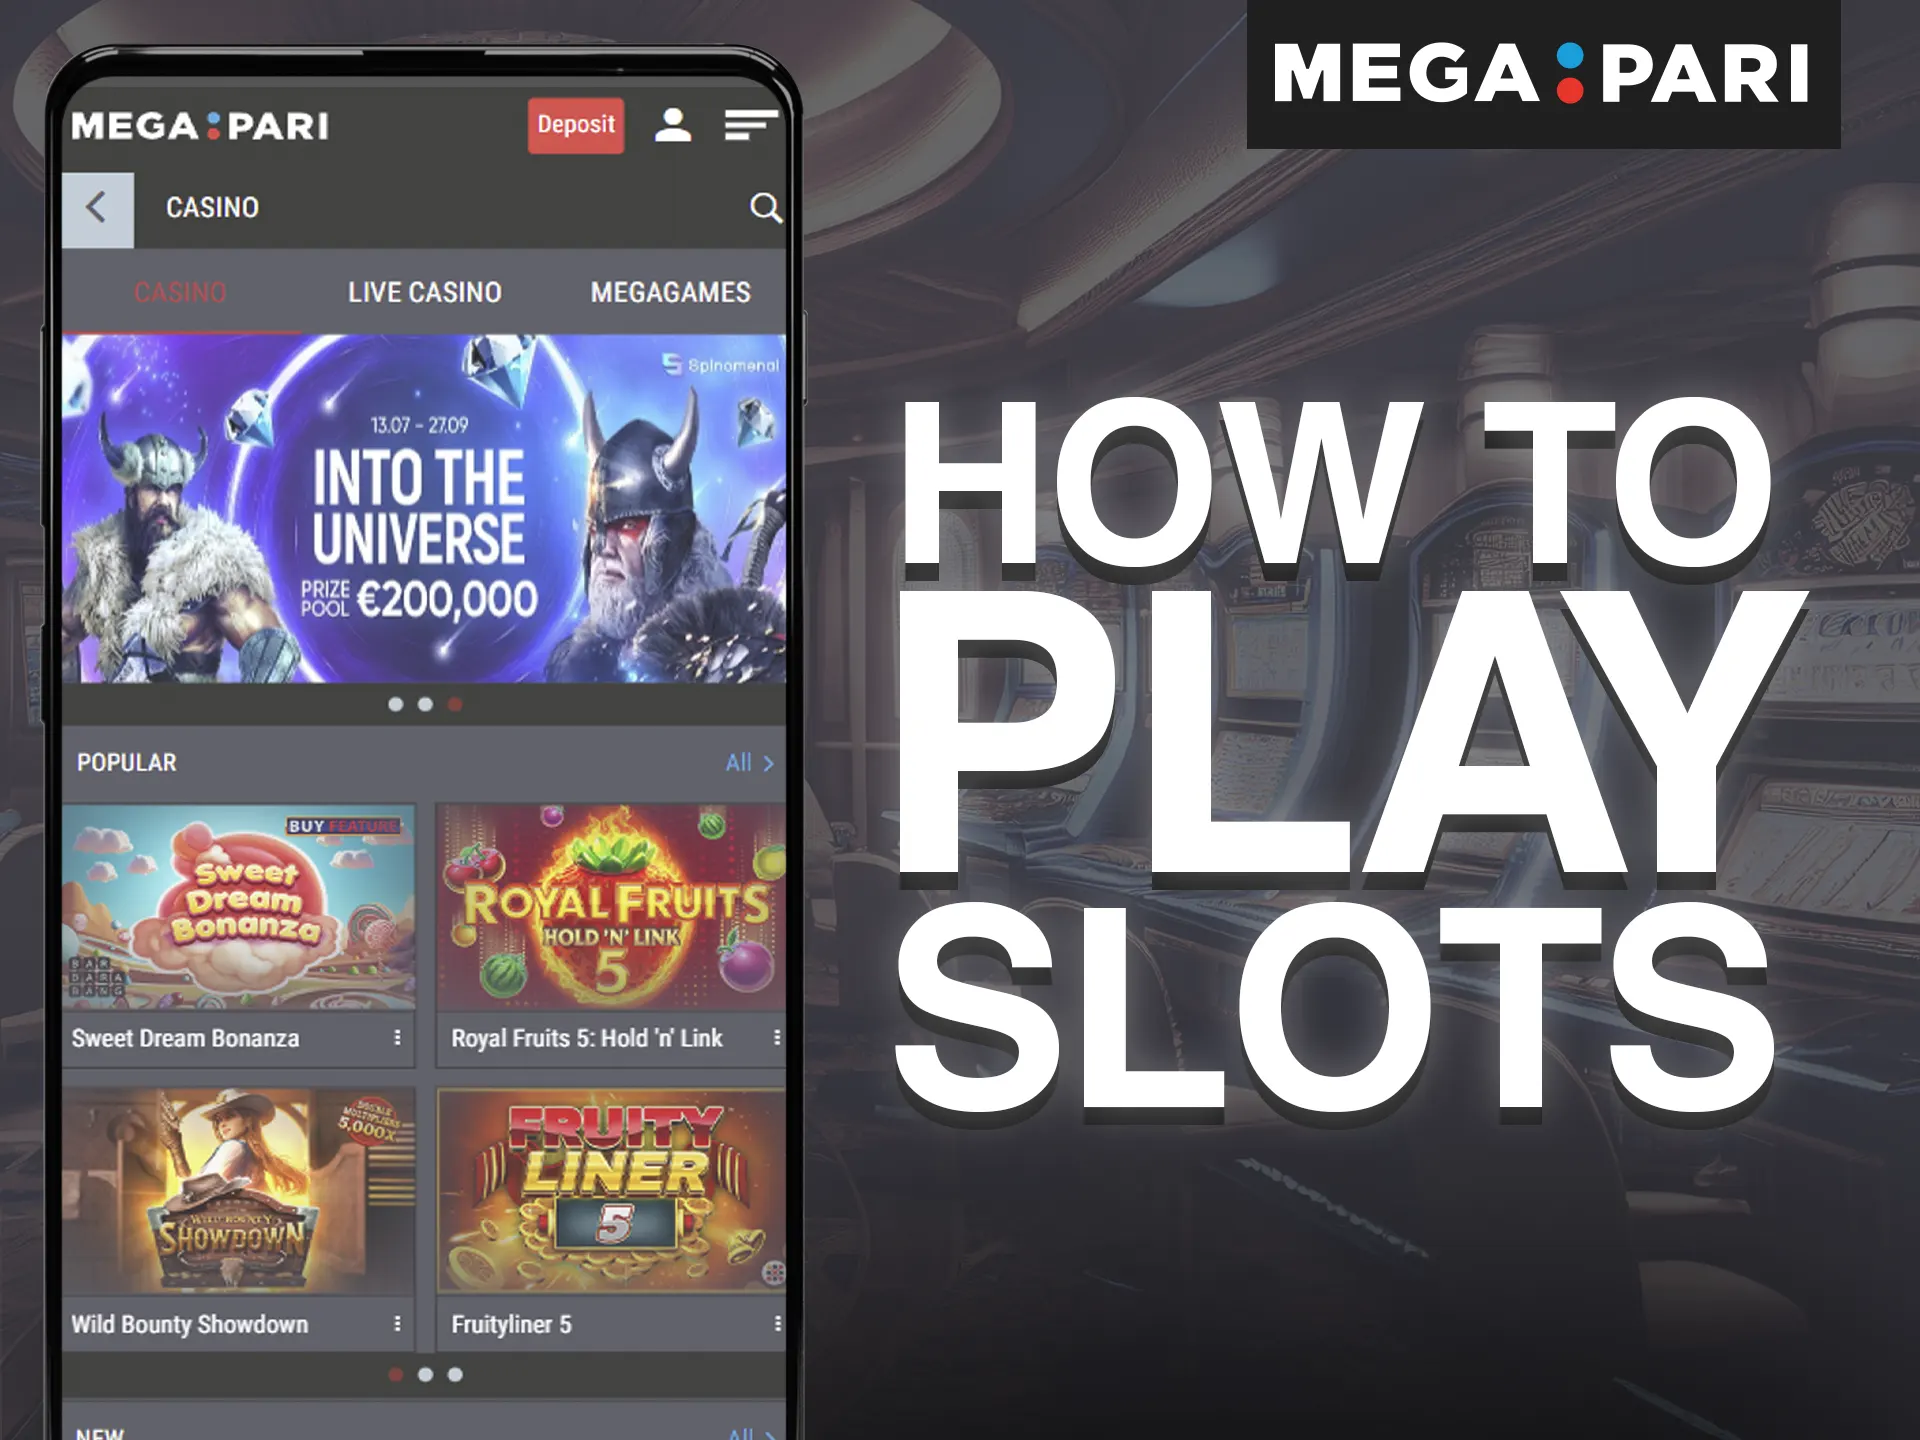 Learn how to play slots on Megapari.